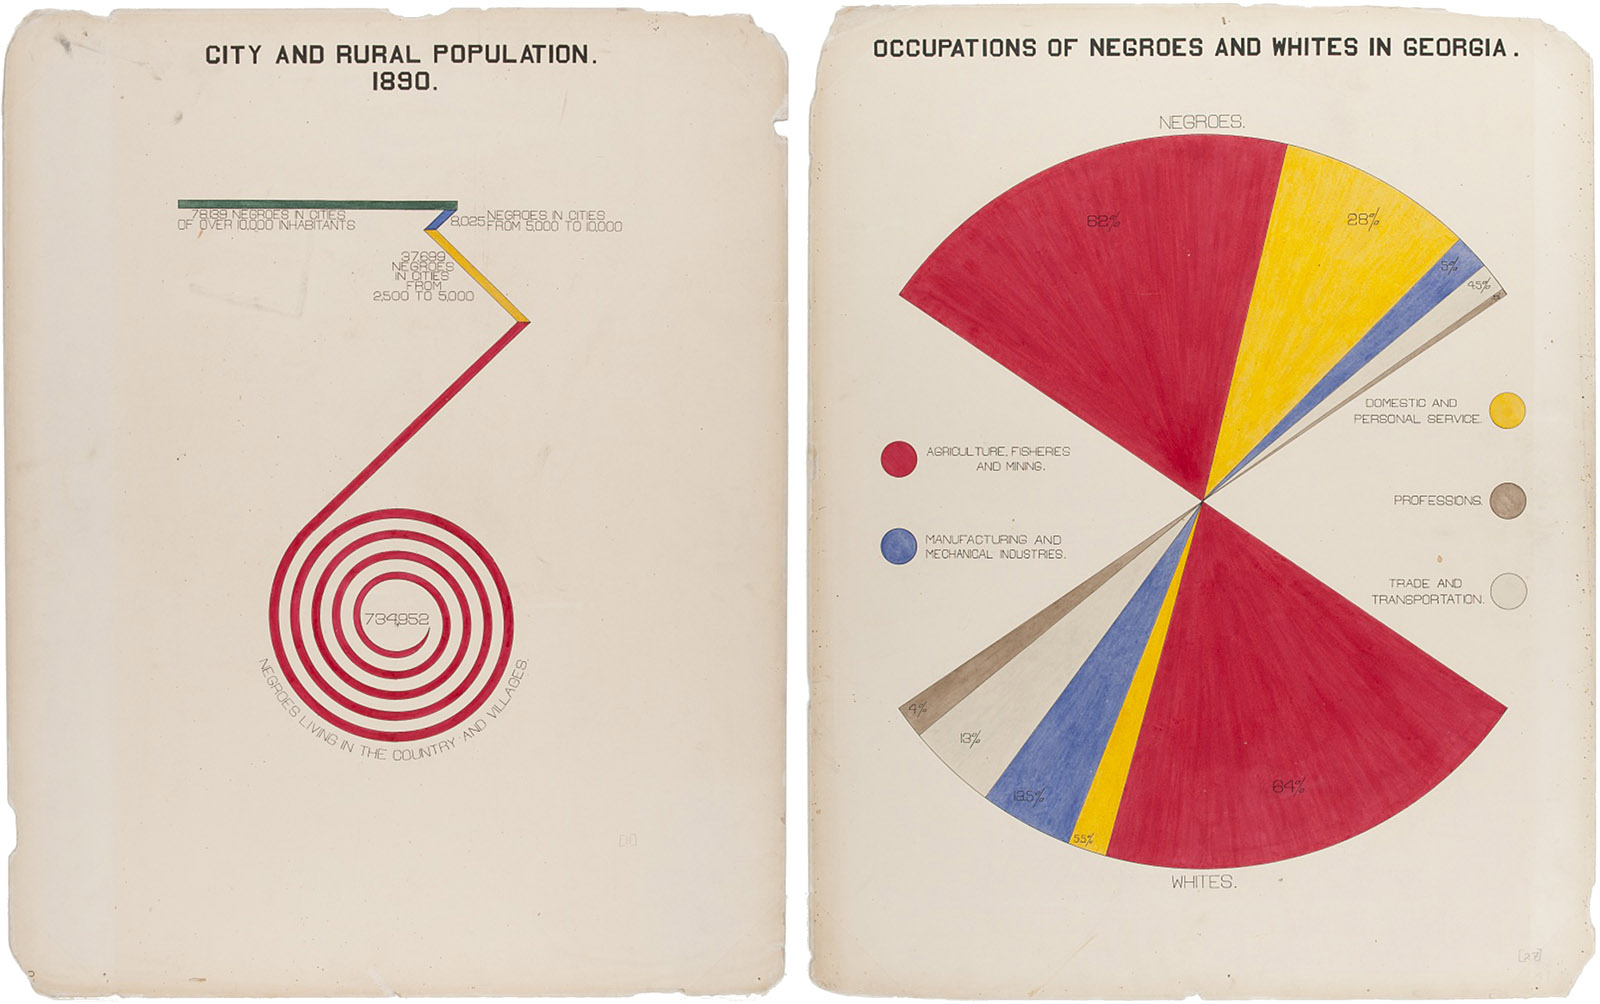 Visualizations by W.E.B. Du Bois from the ‘American Negro Exhibit’ at the Paris Exposition, 1900